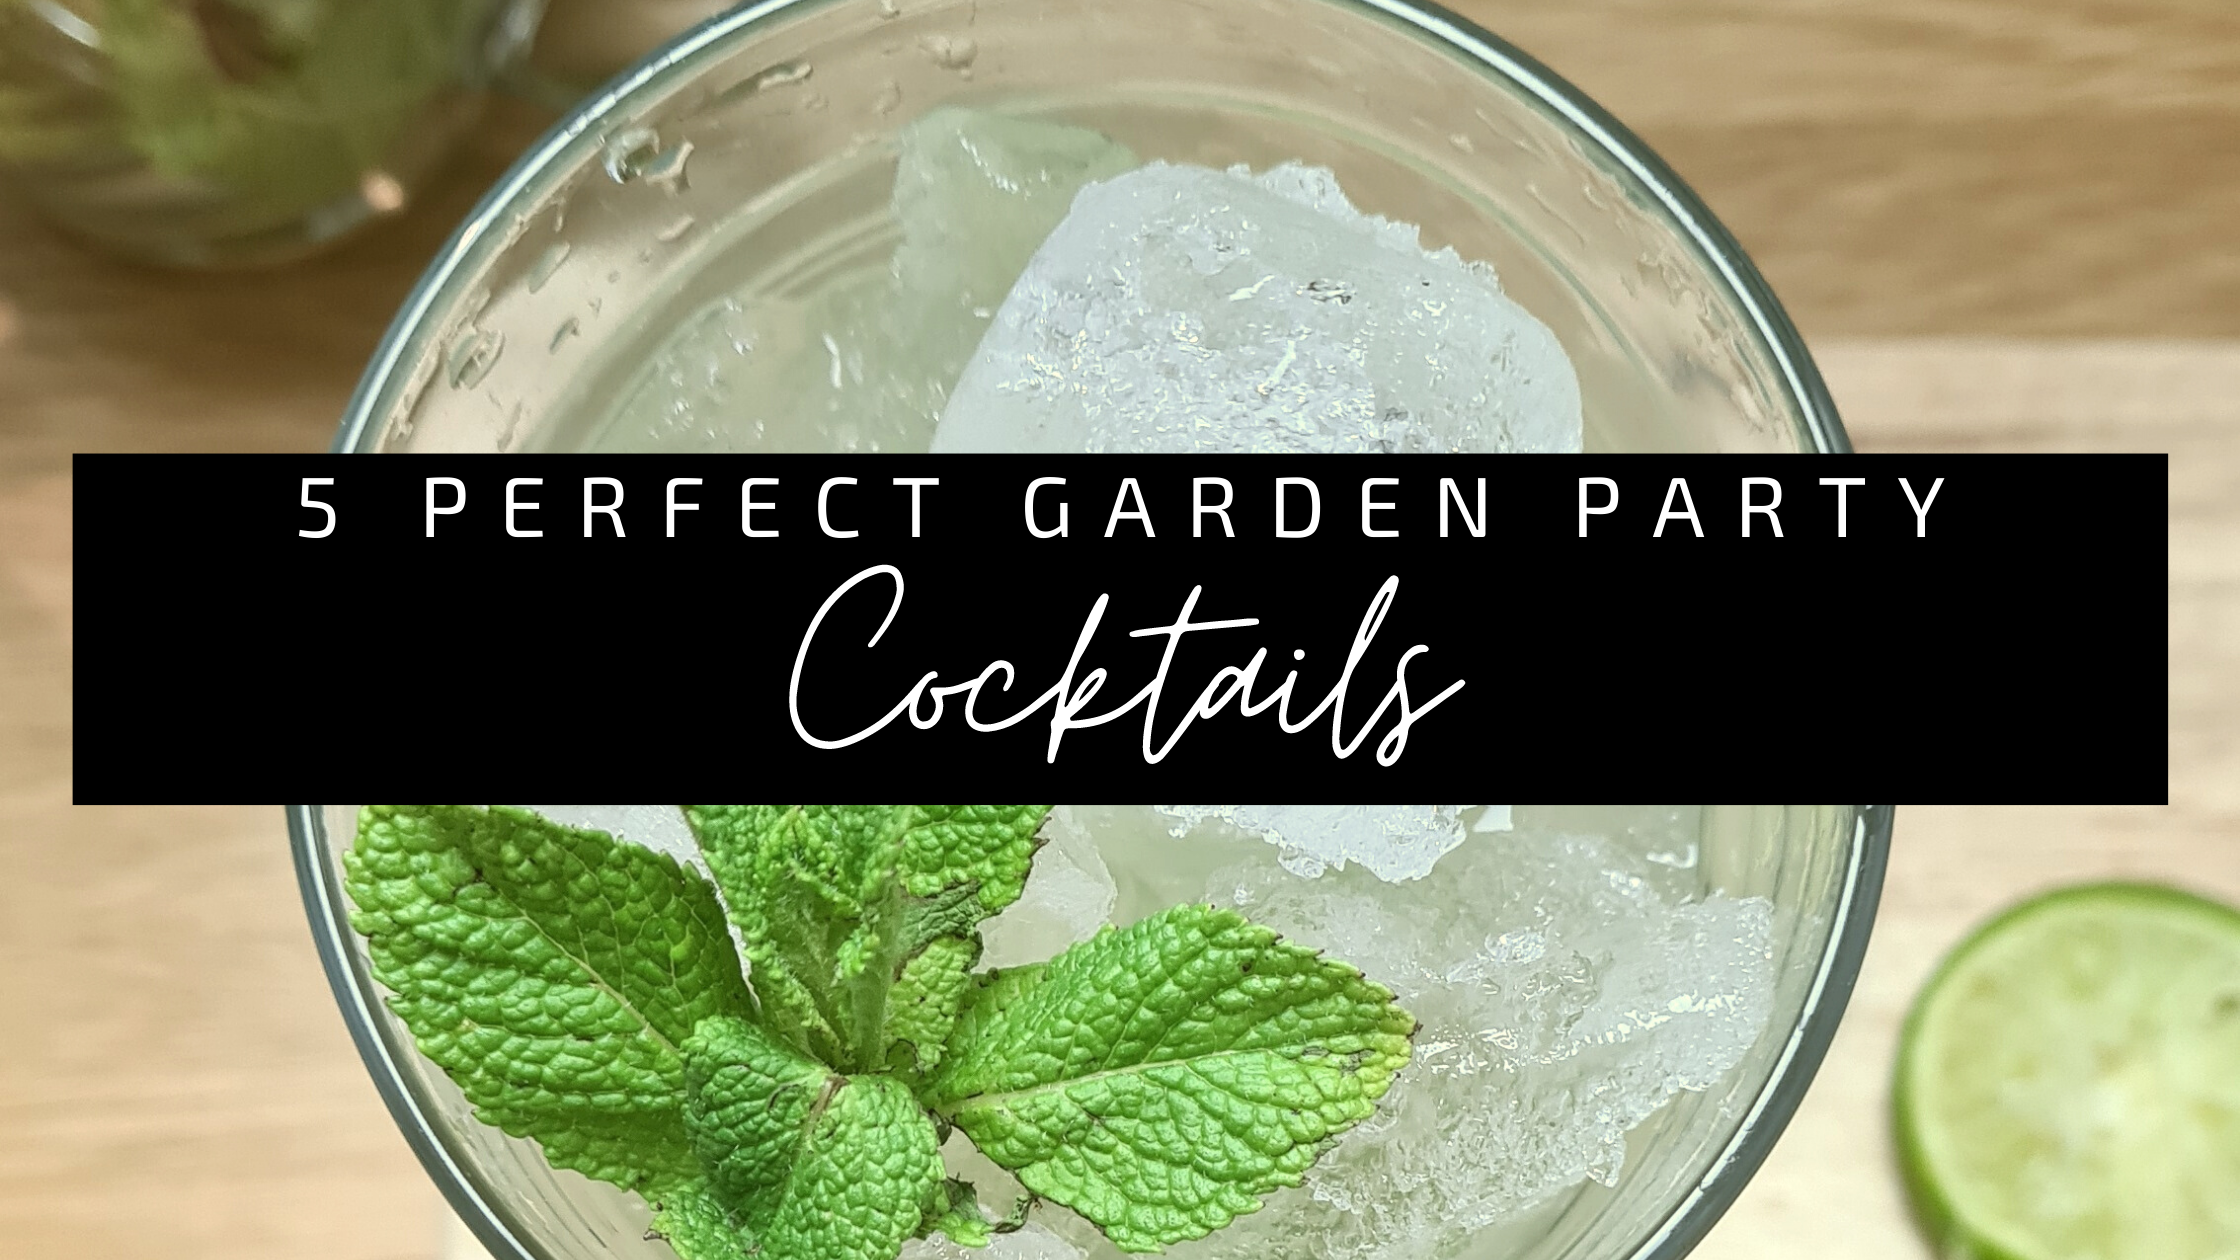 5 Perfect Garden Party Cocktails